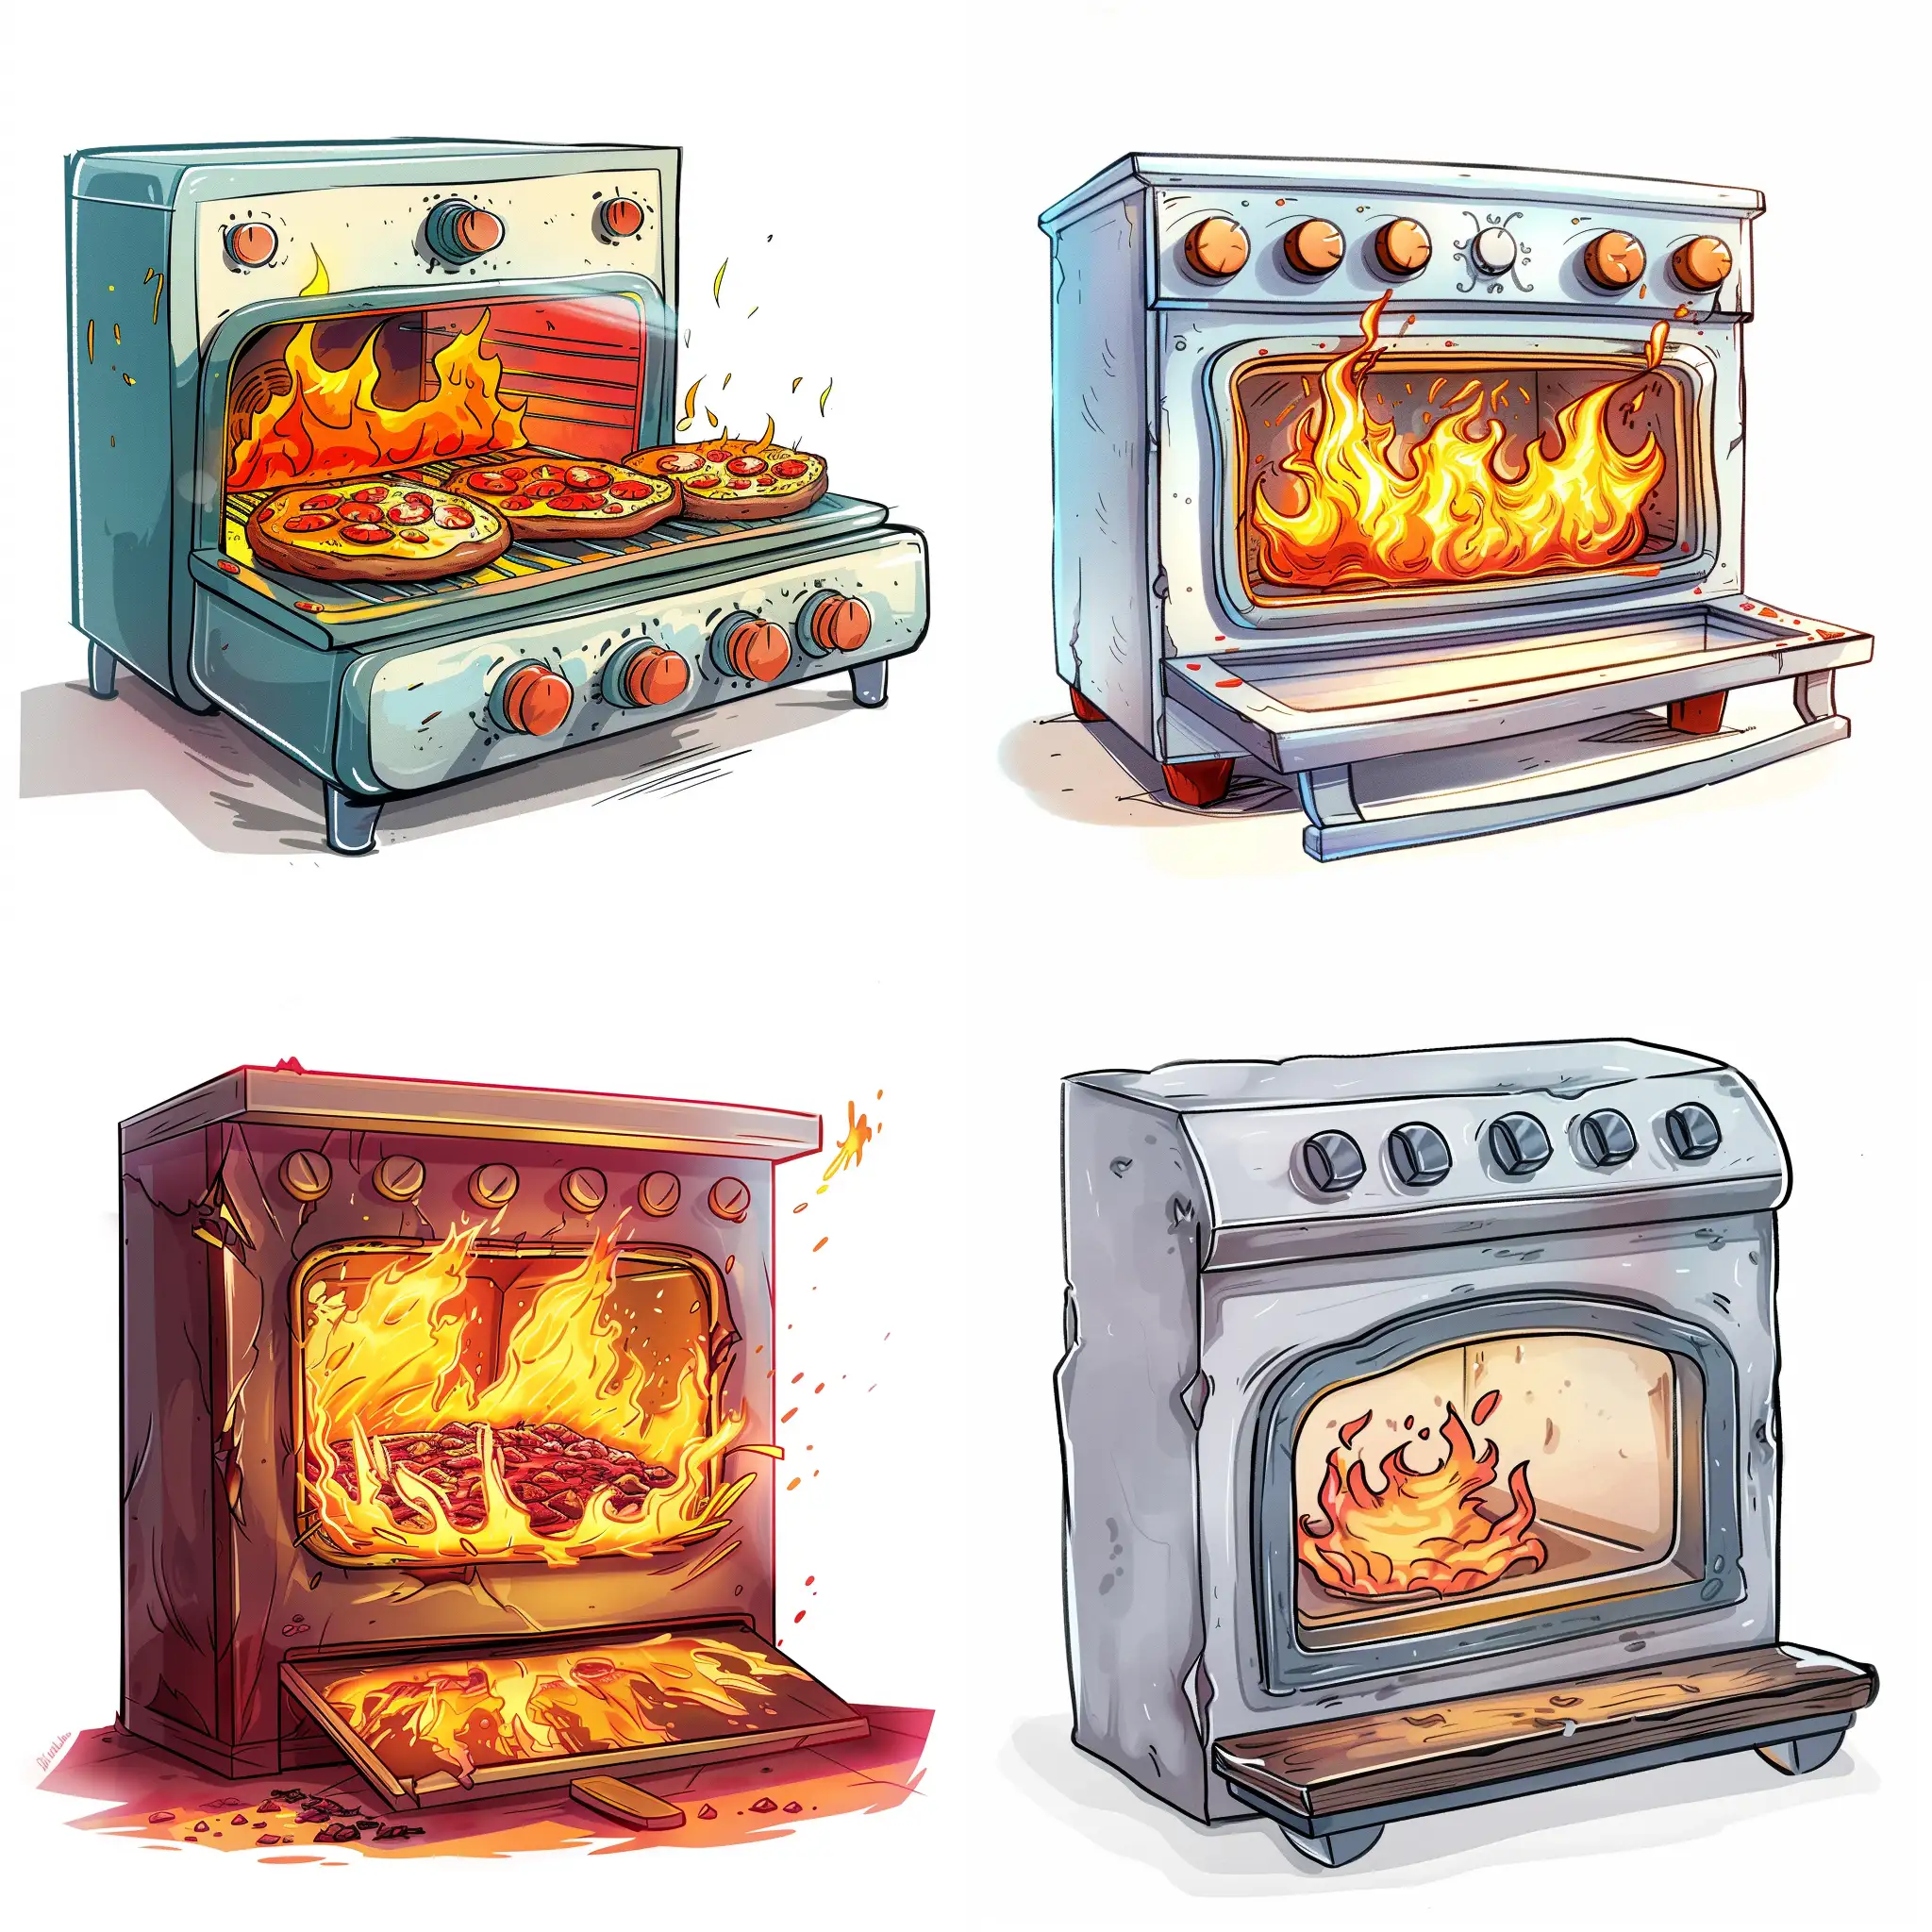 In comic cartoon drawing of oven with fire, white background, Use only 3c2337,fadcca,f5965f,ed6f4c,fa4637, Style of Erik Jones, sparth, highly detailed, hyper-detailed, 